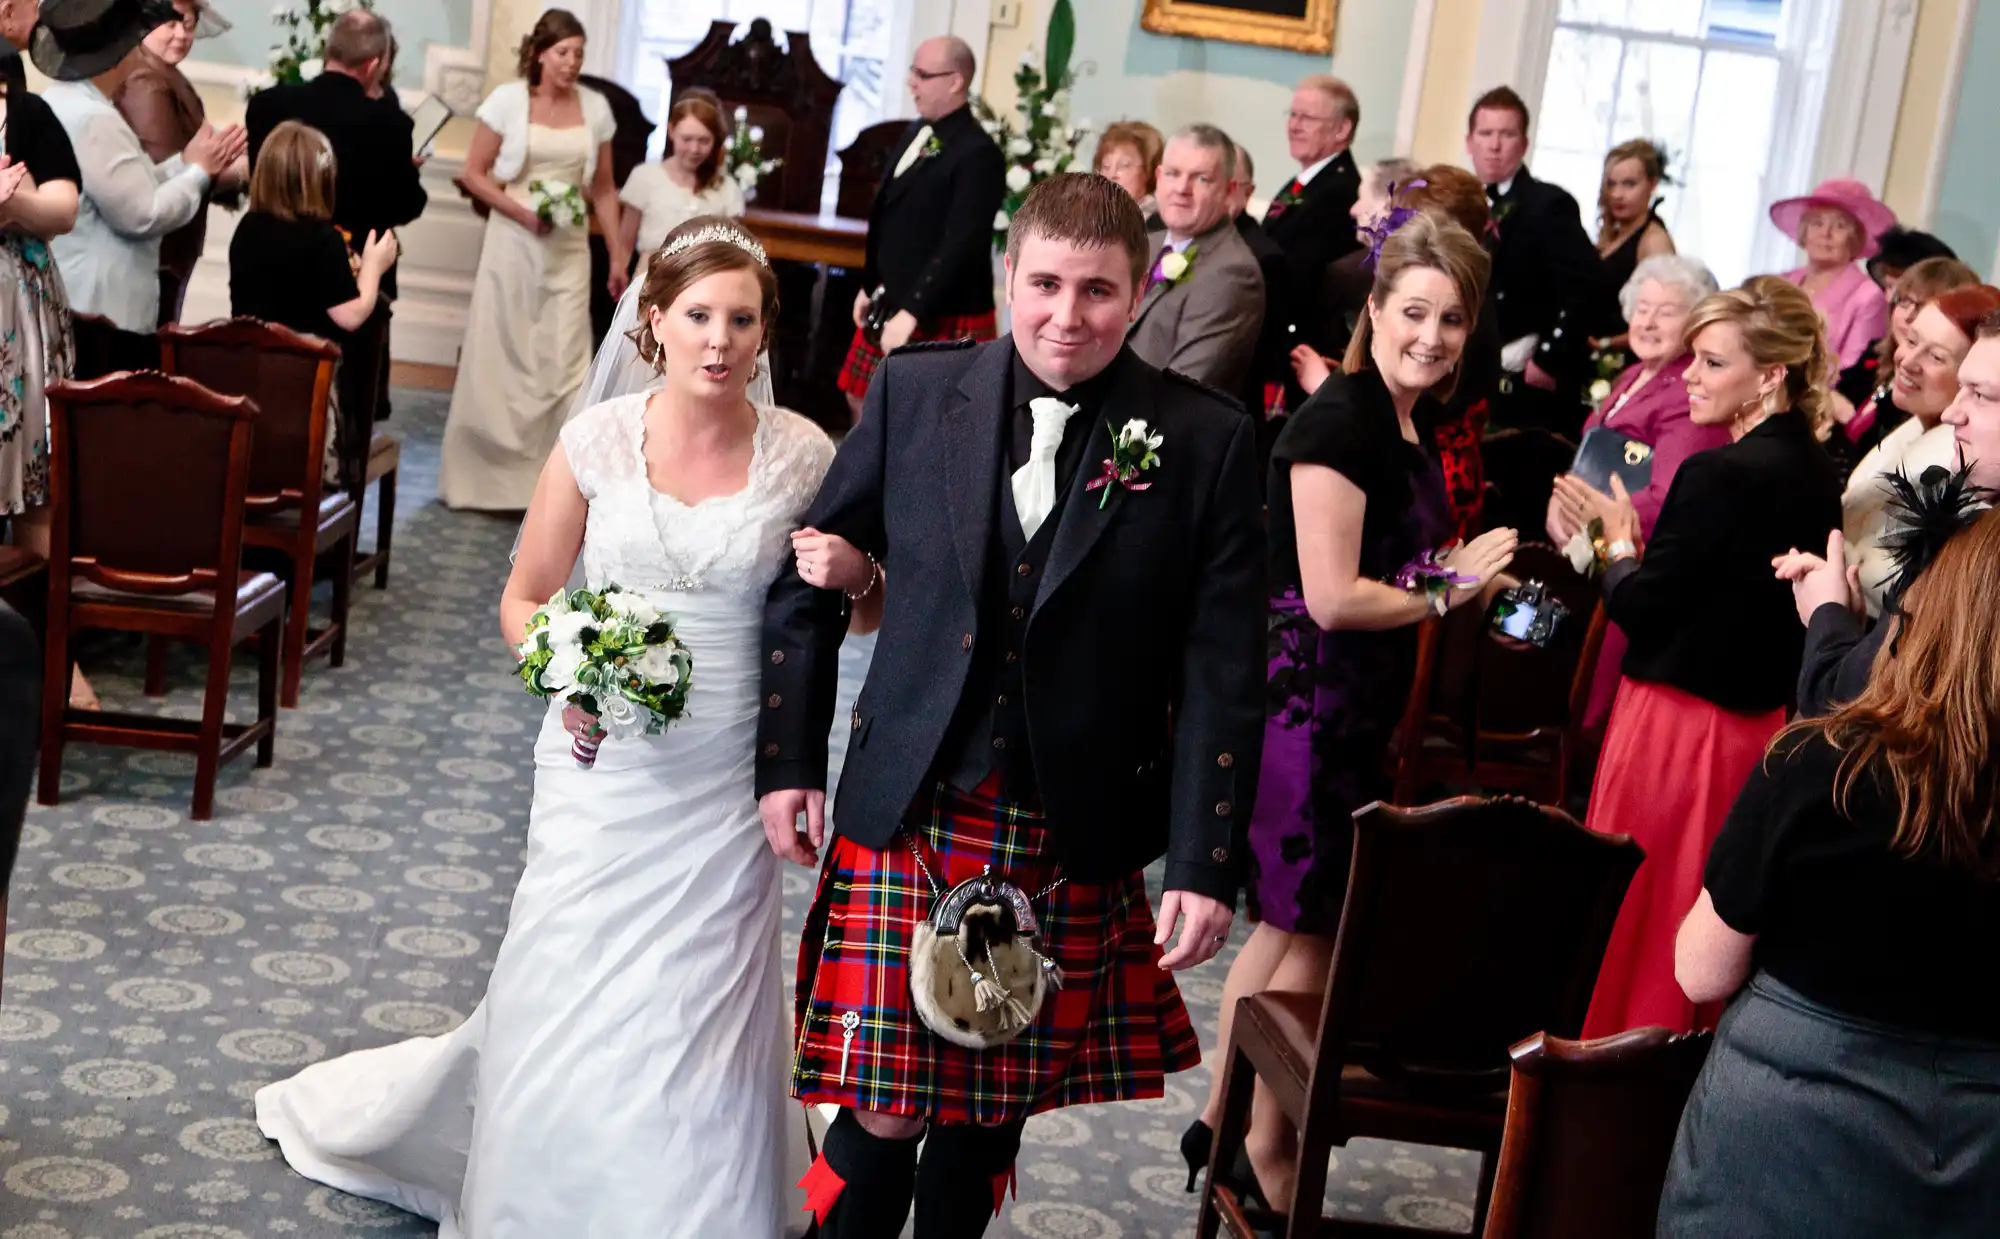 A bride in a white dress and a groom in a kilt walk down the aisle, surrounded by applauding guests in a decorated room.